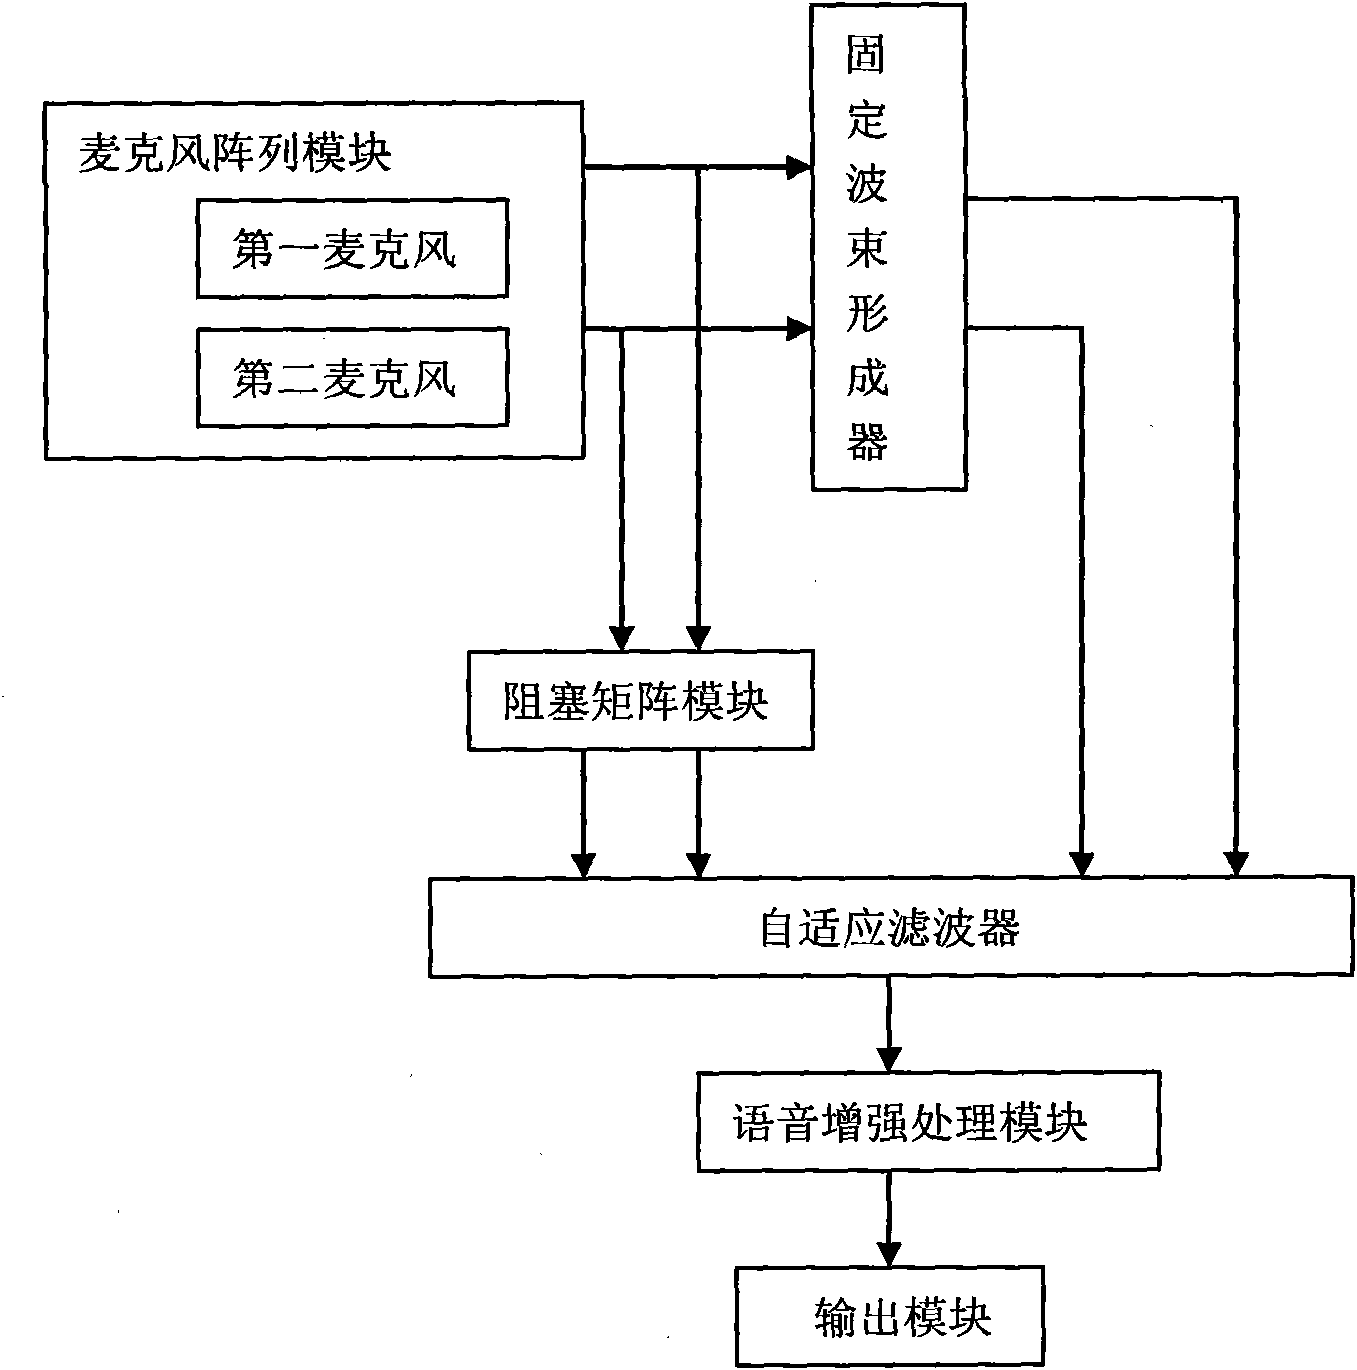 Dual-microphone-based speech enhancement device and method